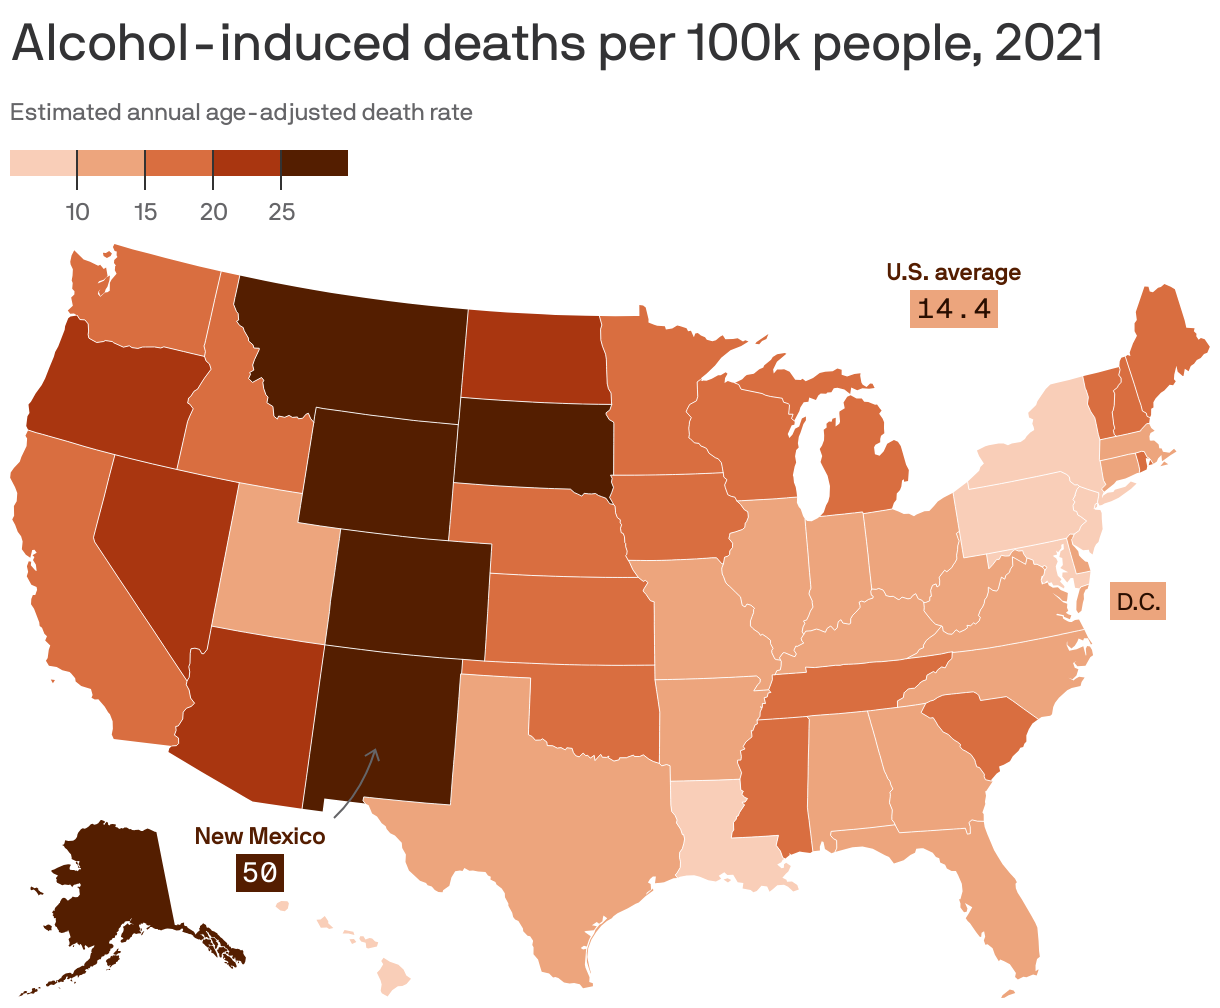 Alcohol-induced deaths per 100k people, 2021